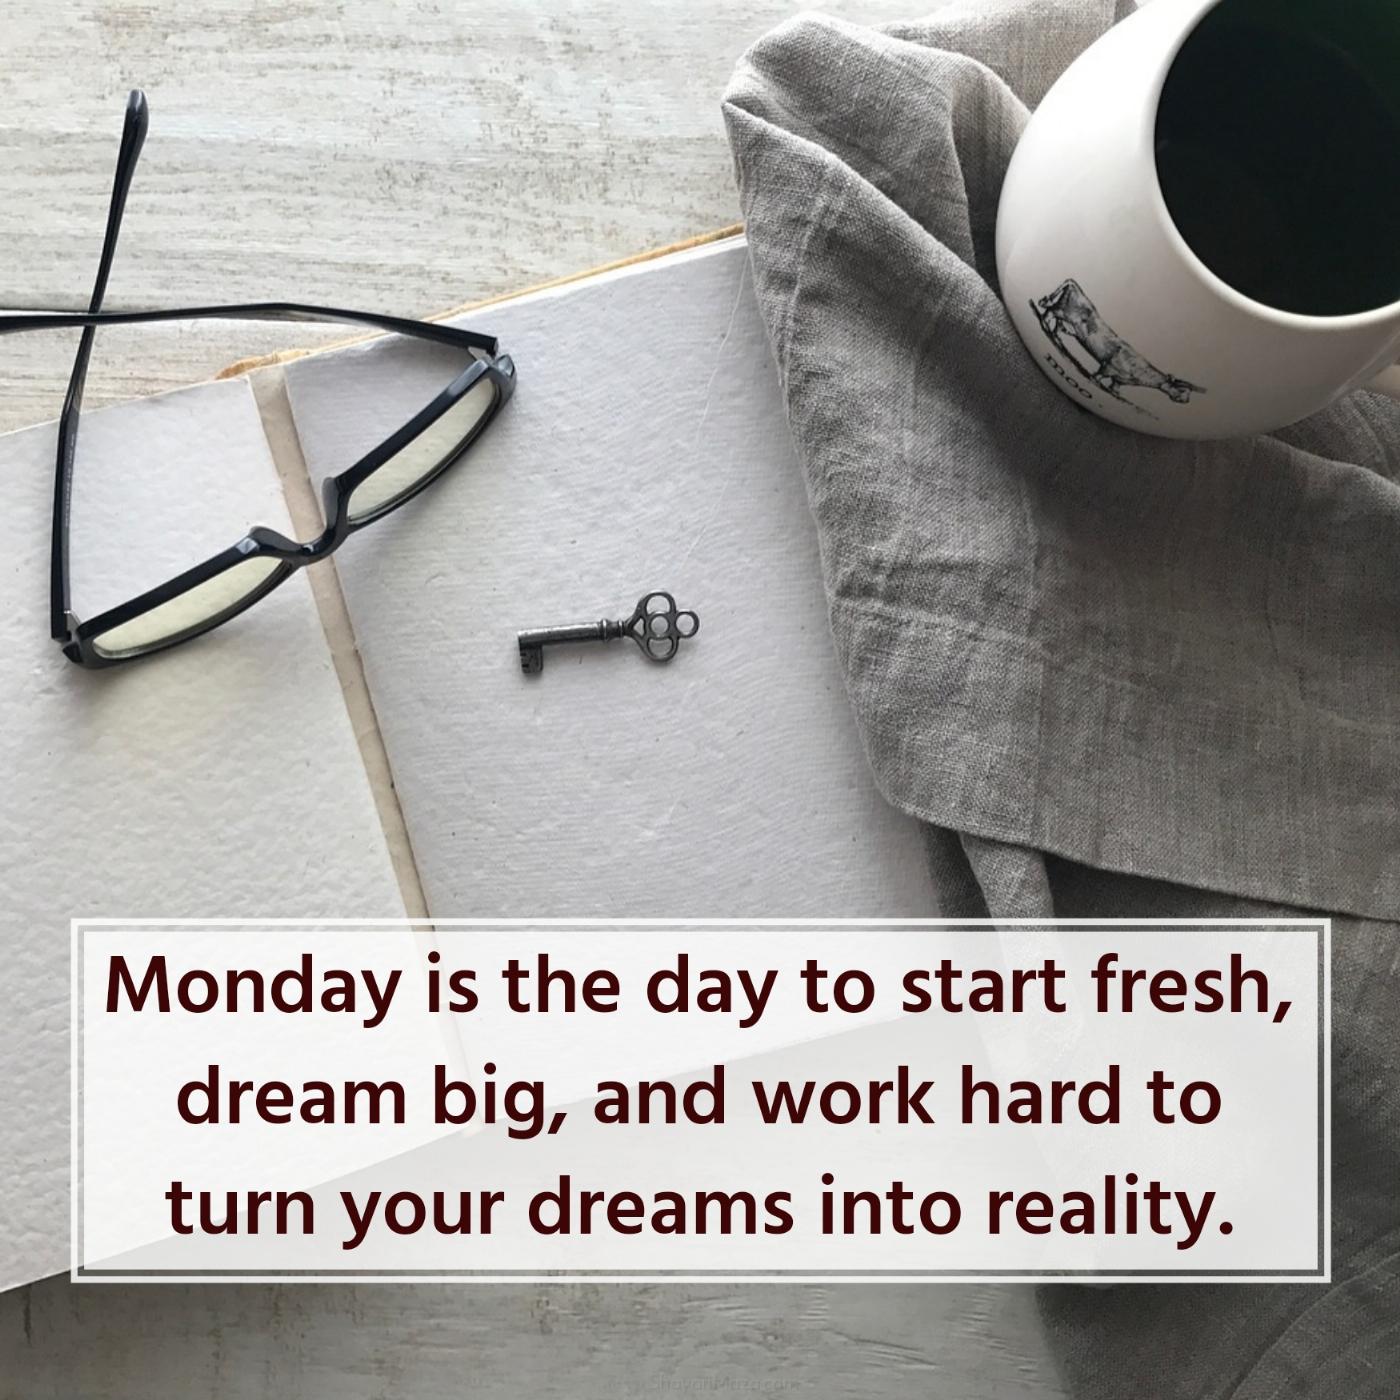 Monday is the day to start fresh dream big and work hard